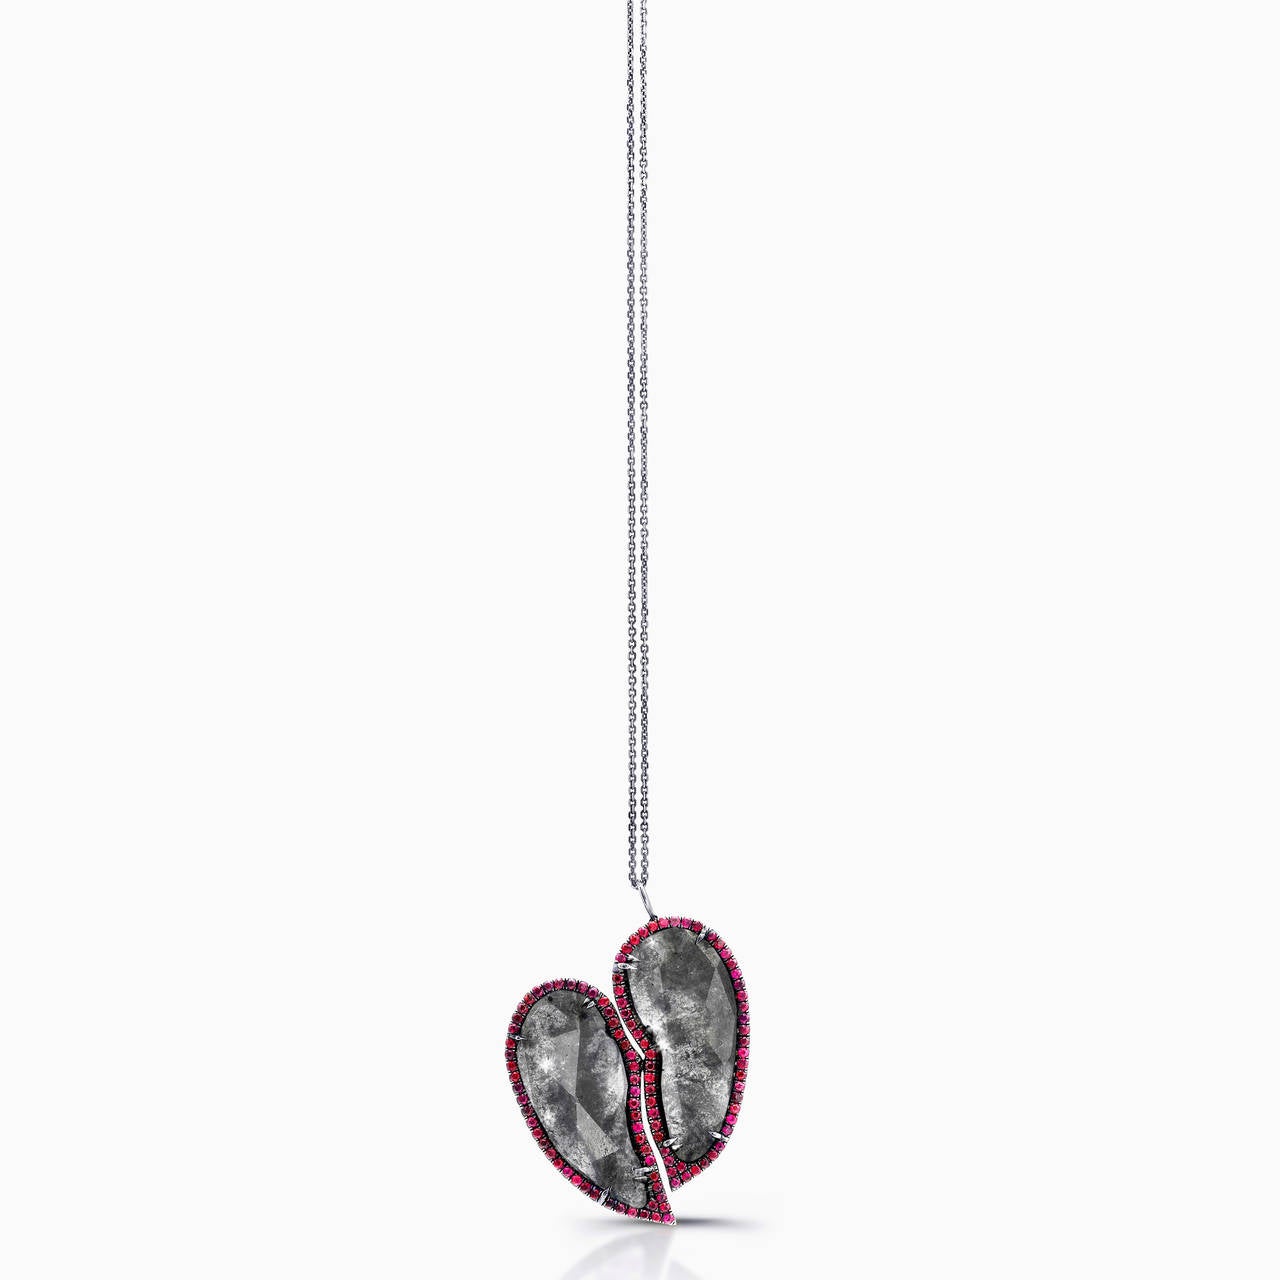 18k blackened gold, black diamond slice heart necklace with ruby micro pave. Hangs on 18k blackened gold 16